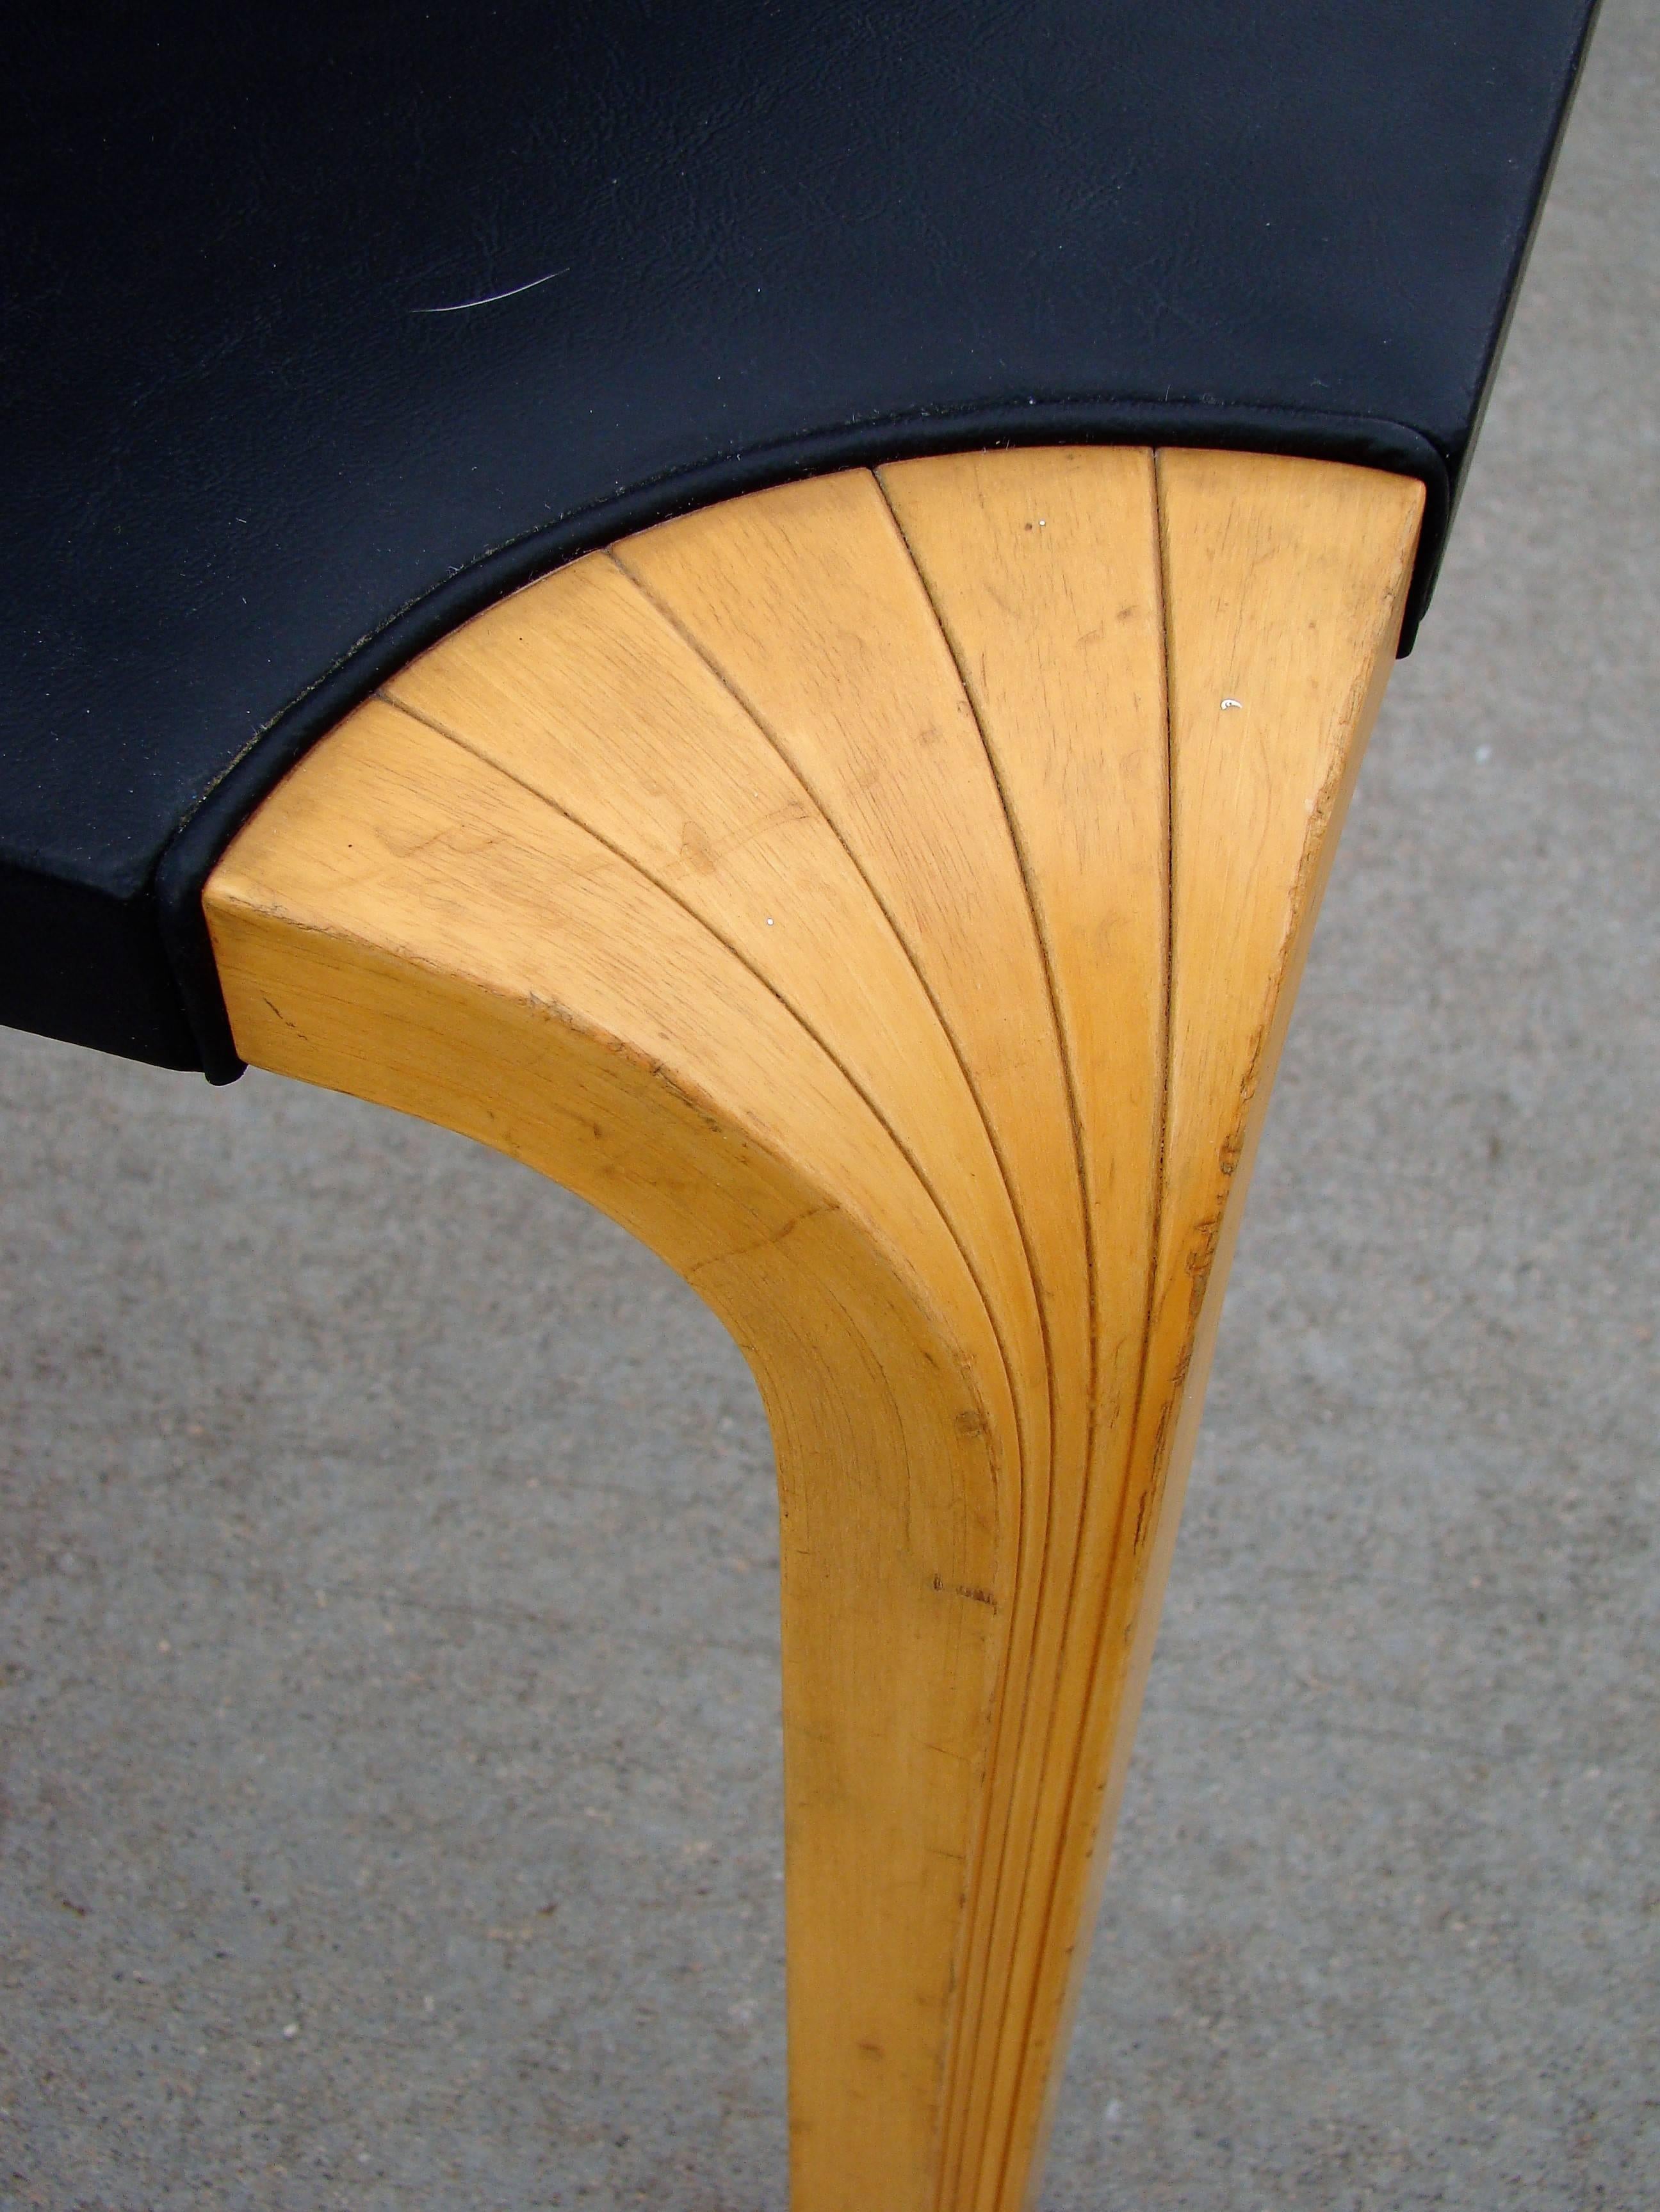 Simple and exquisite, the 'fan leg' stool is constructed from birch and leather. Each of the triple legs are first bent and formed, then cut into five individual slices that are fanned-out and re-assembled into the unique form. A quiet testimony to